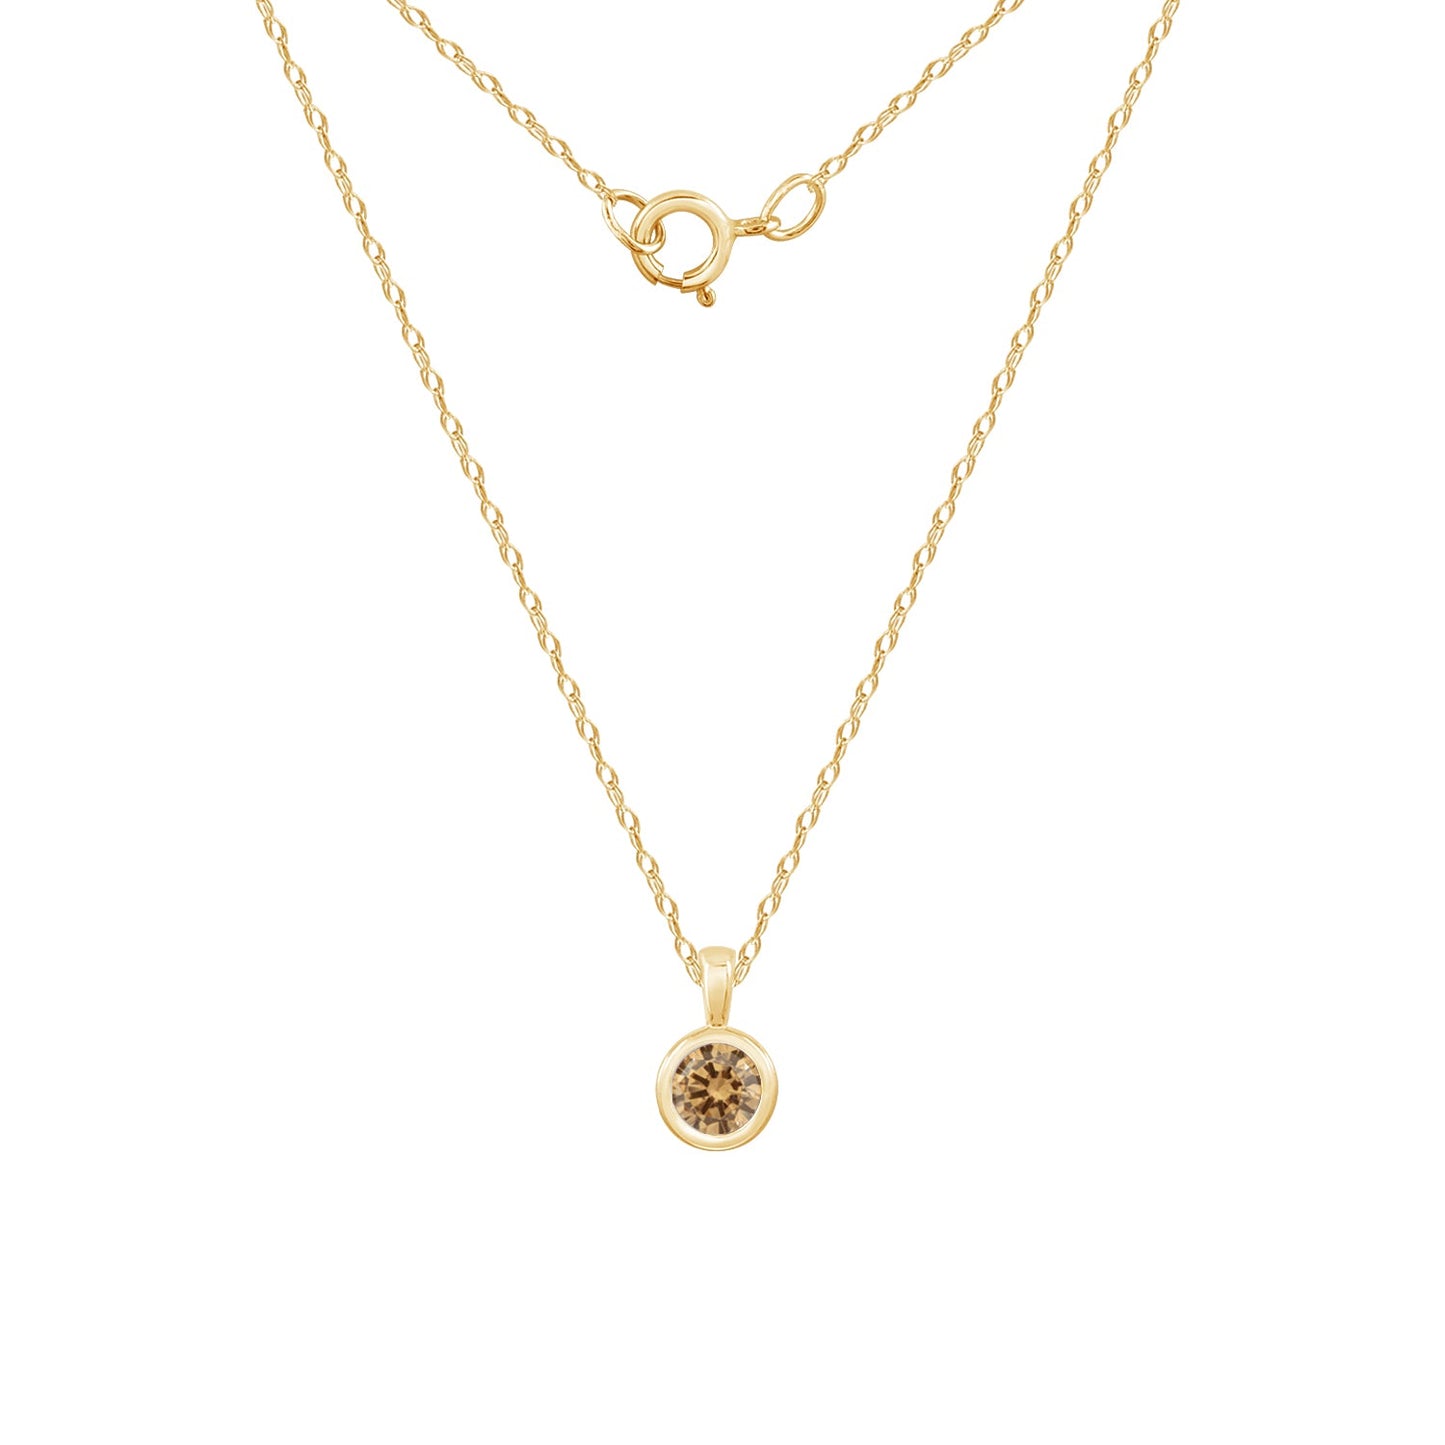 10K Solid Gold Birthstone Pendant Necklace